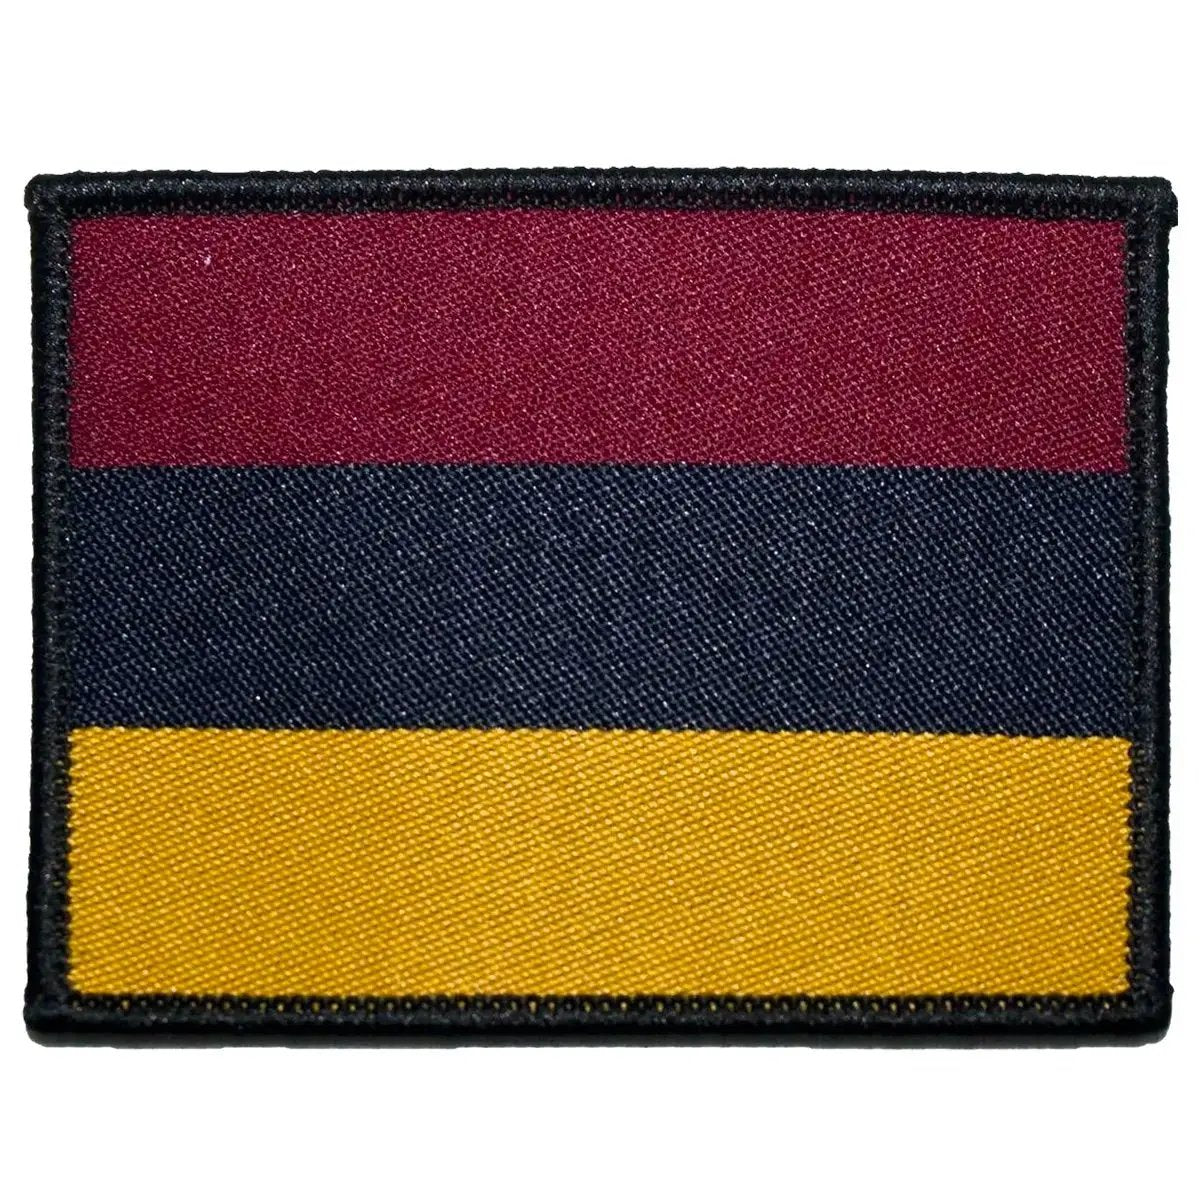 Royal Army Medical Corps TRF - Iron or Sewn On Patch - John Bull Clothing